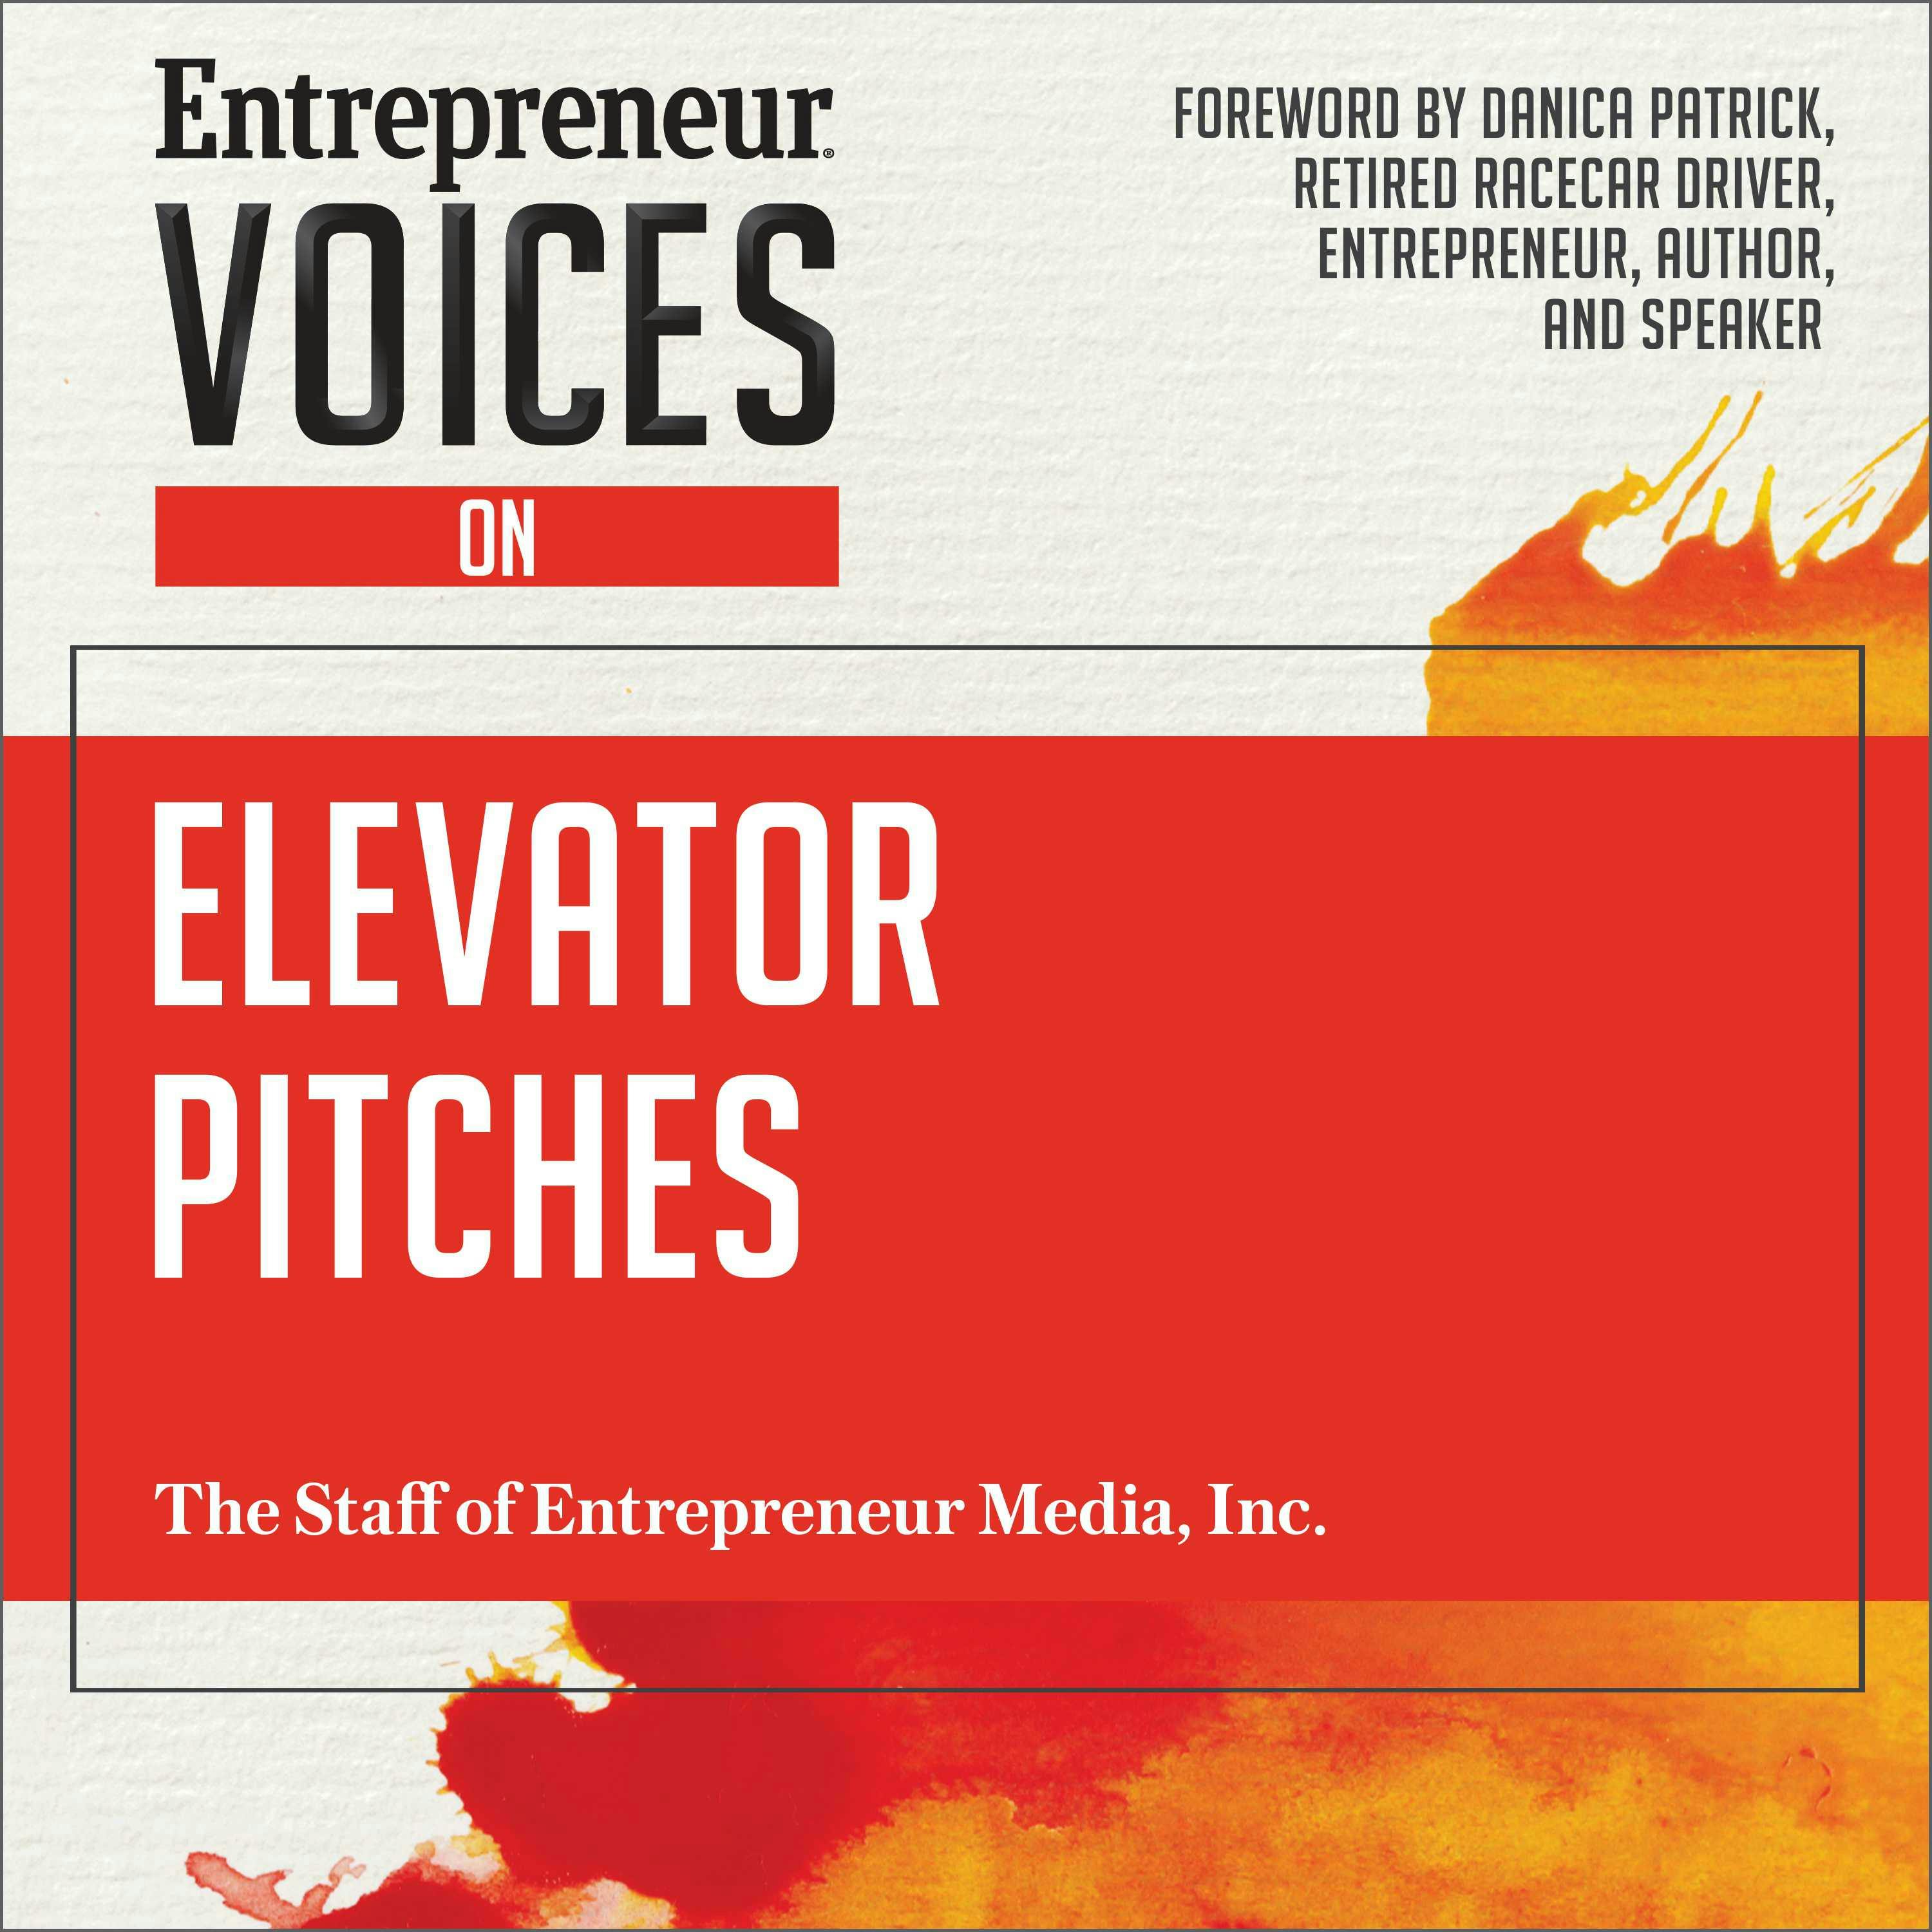 Entrepreneur Voices on Elevator Pitches - undefined